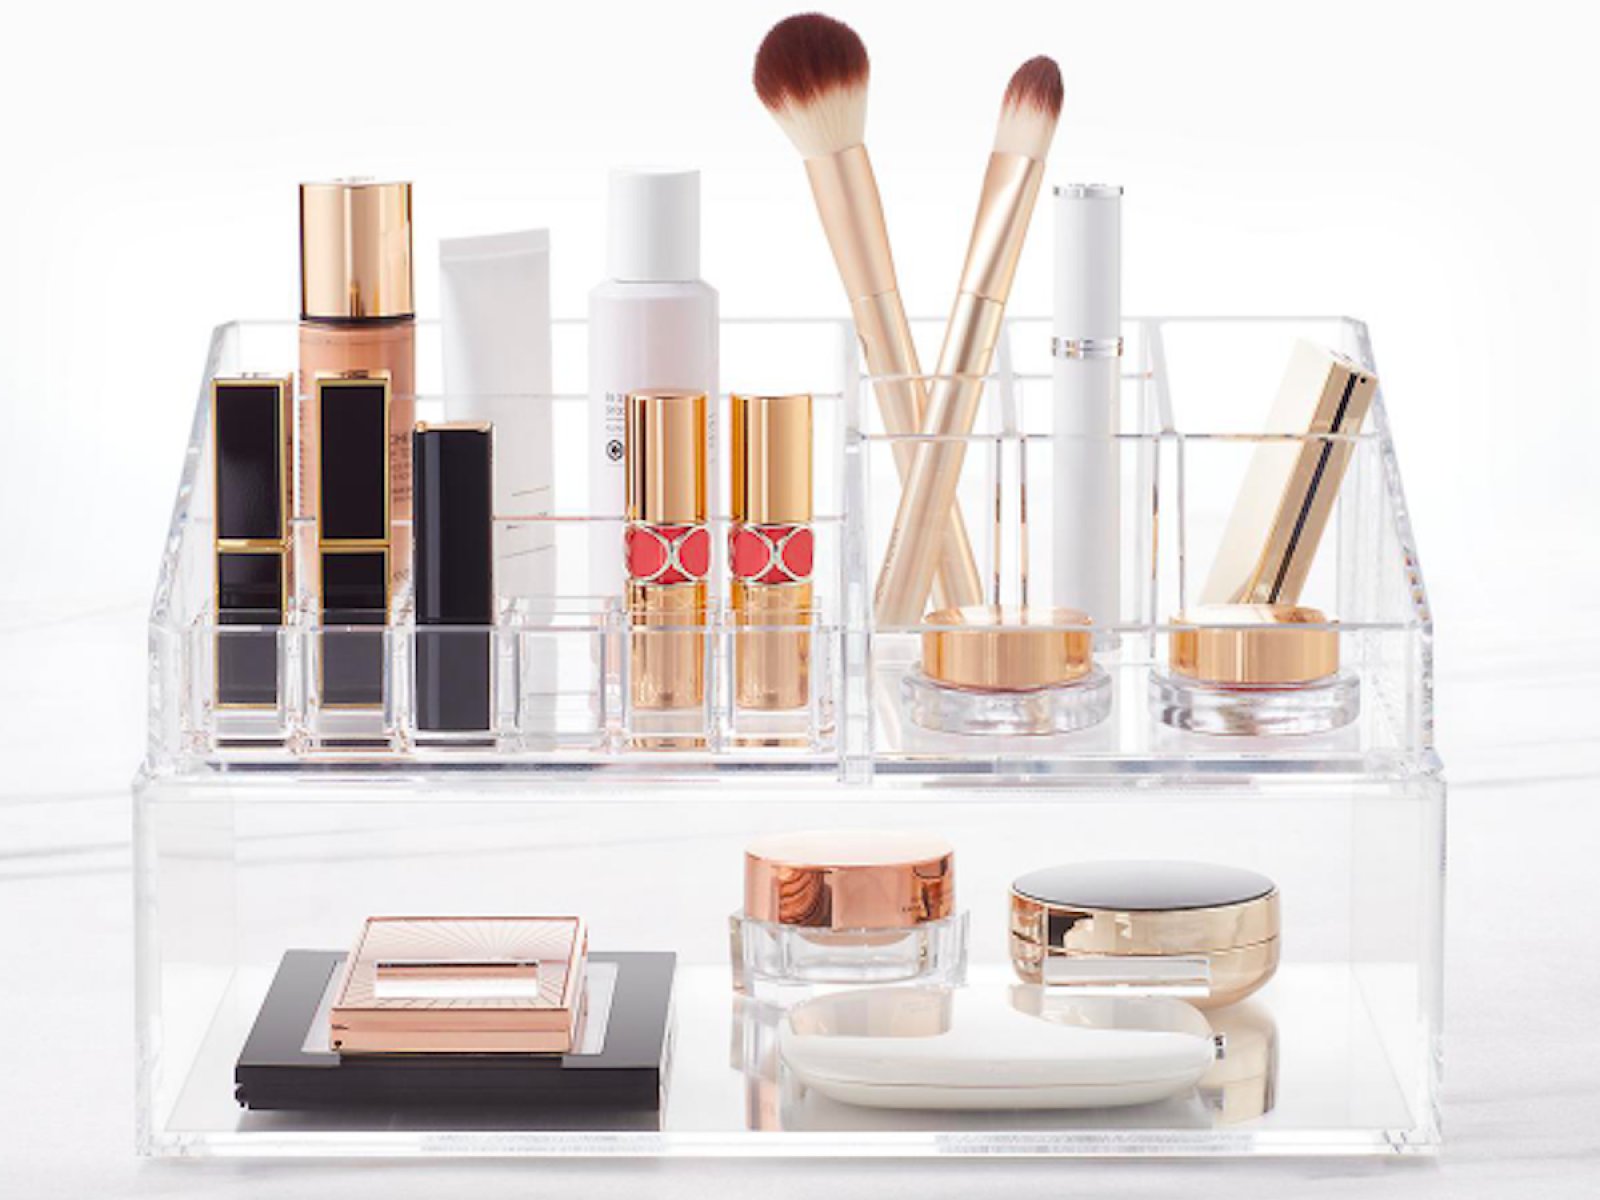 23 Greatest Makeup Organizers to Declutter Your Beauty Products in 2022